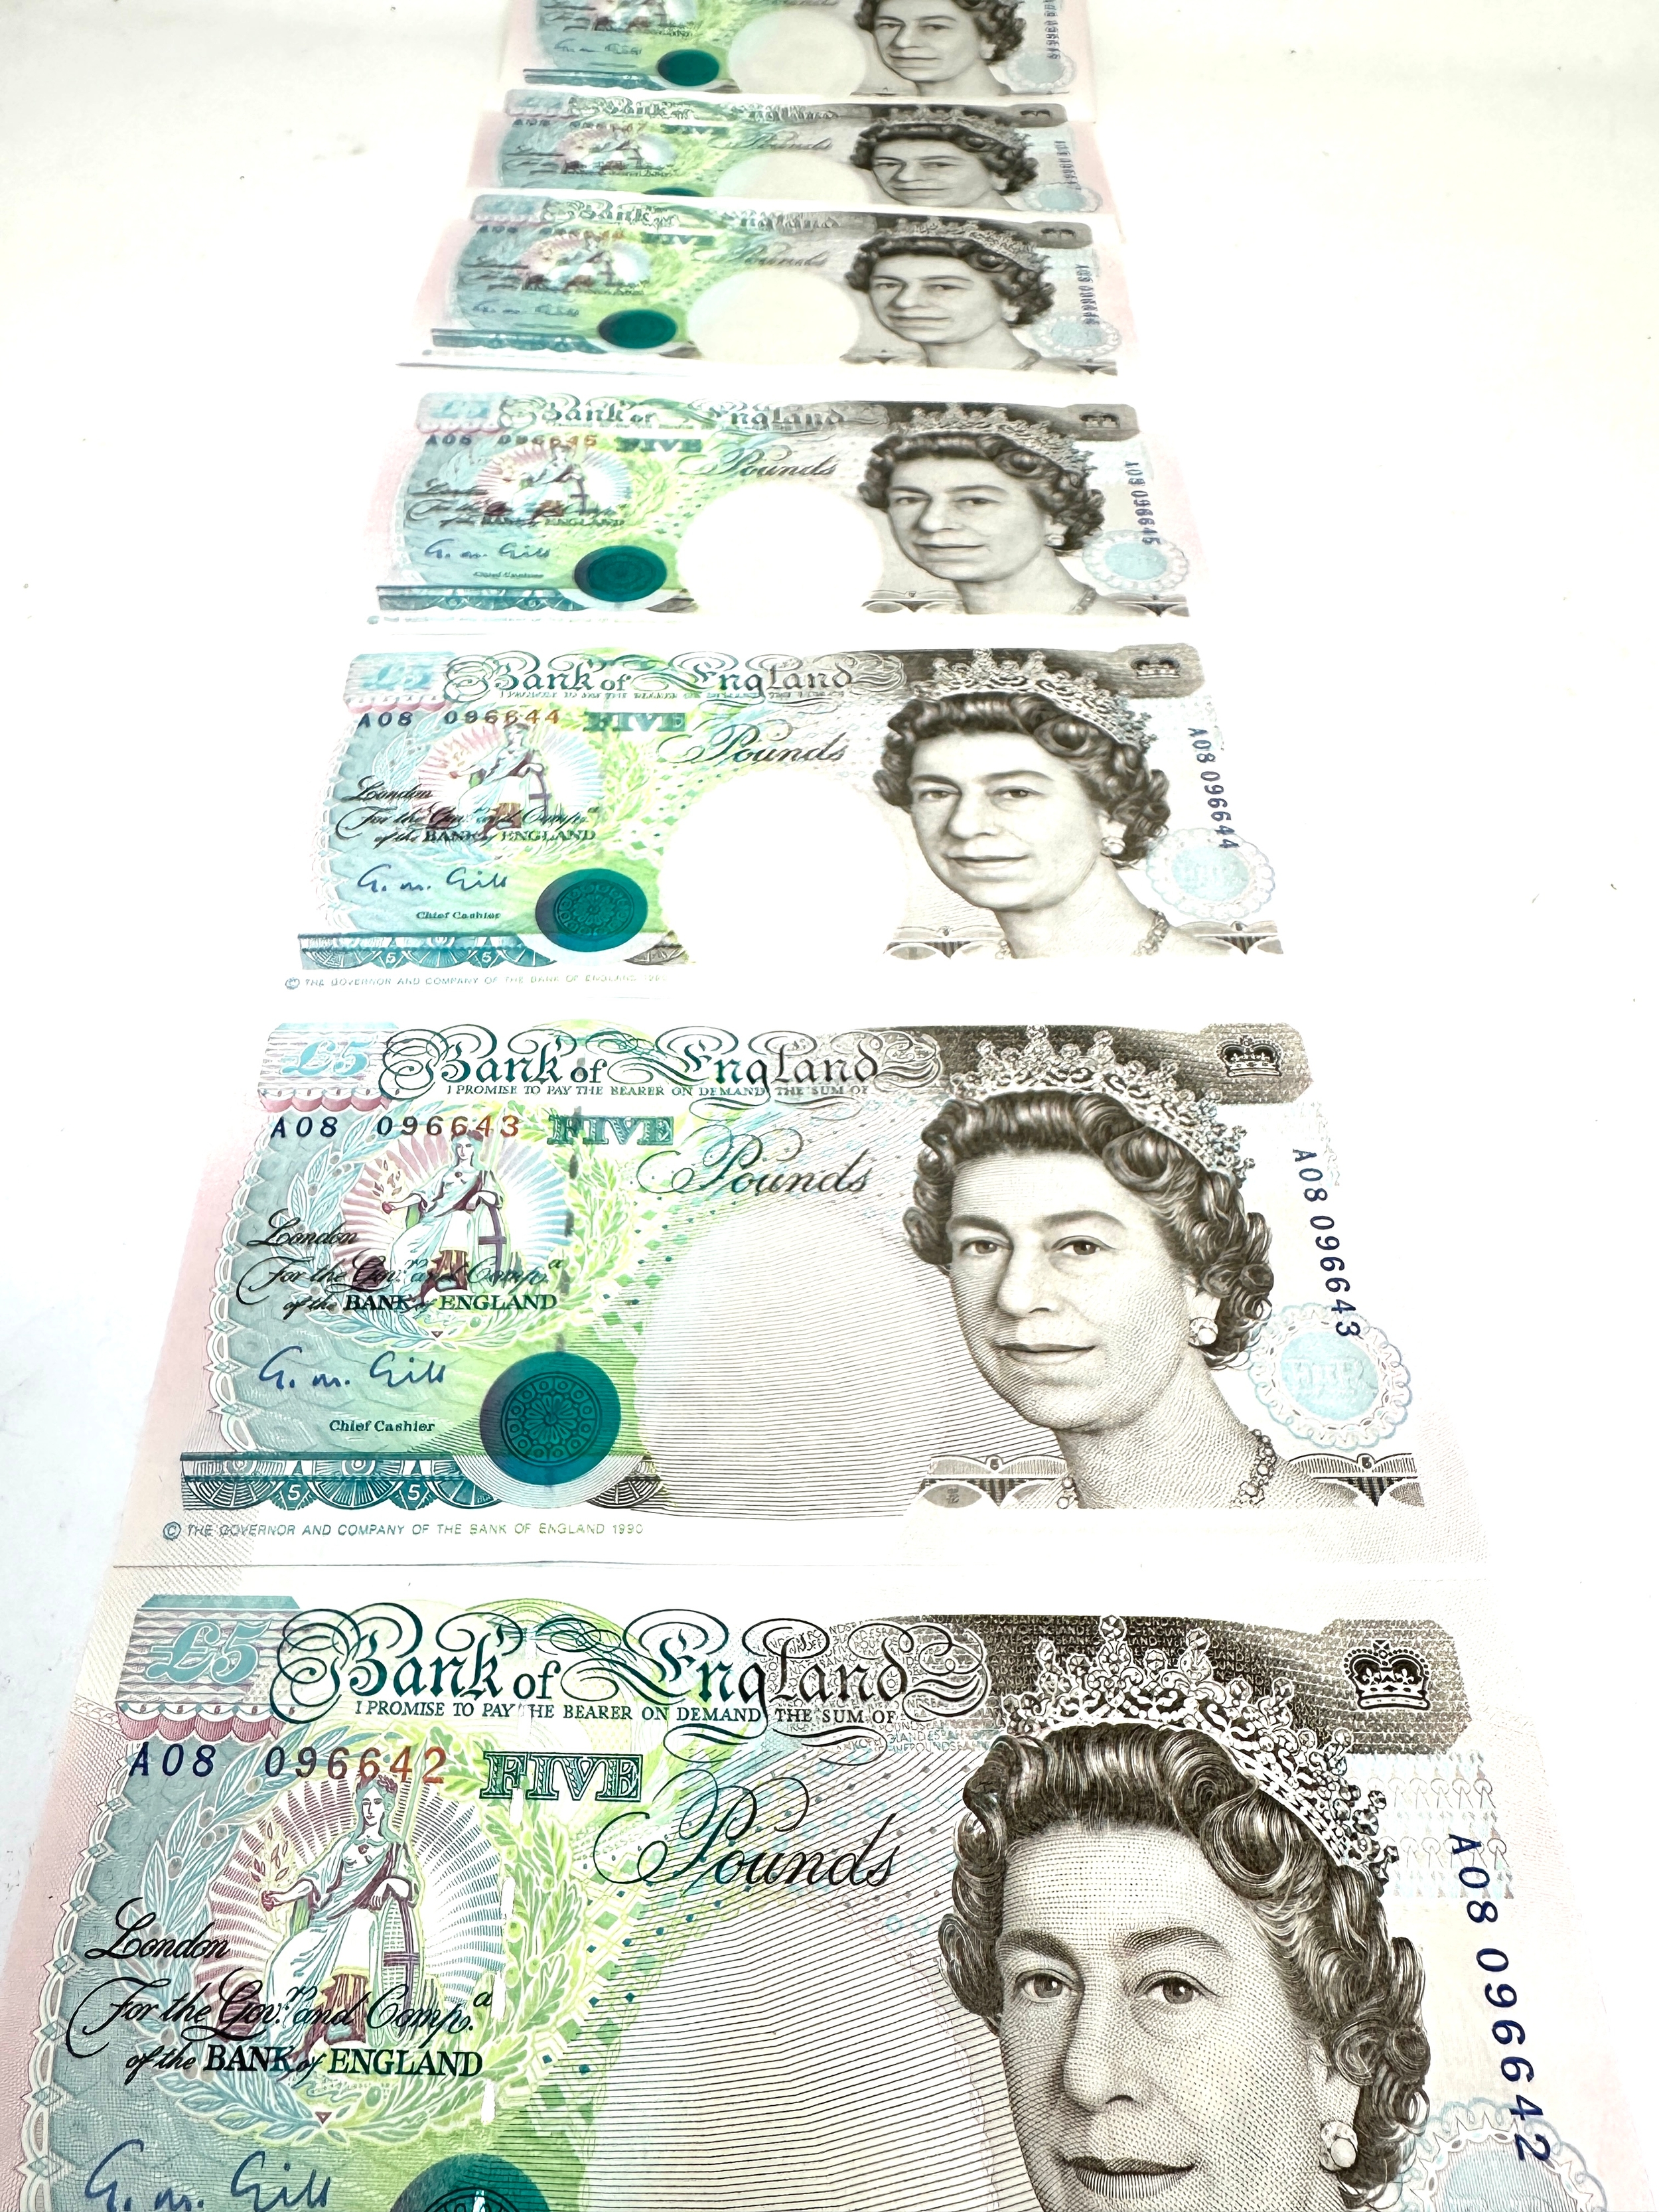 8 x bank of england £5 five pound notes consecutive numbers dated 1990 look in un-used condition - Image 3 of 5